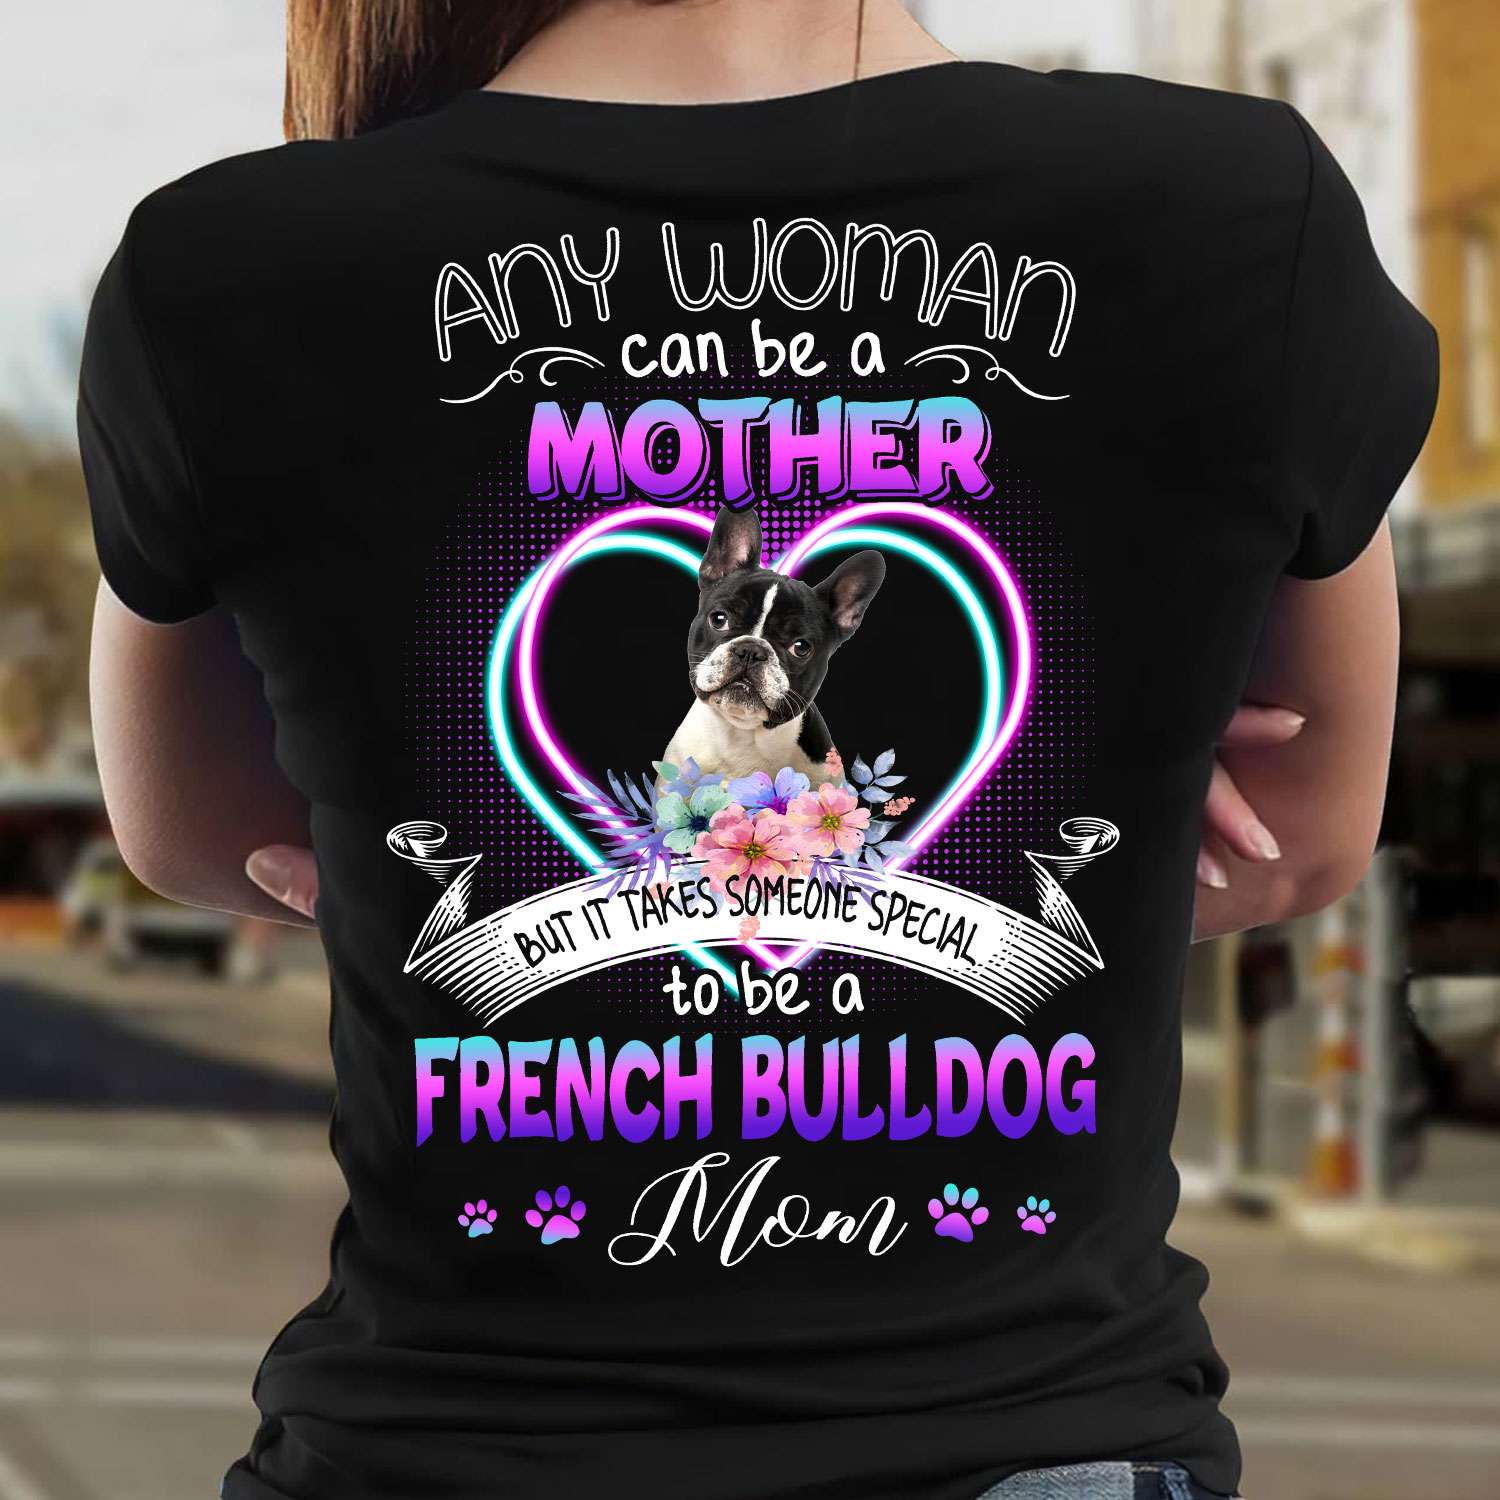 Any woman can be a mother but it takes someone special to be a French bulldog mom - Gift for dog mom